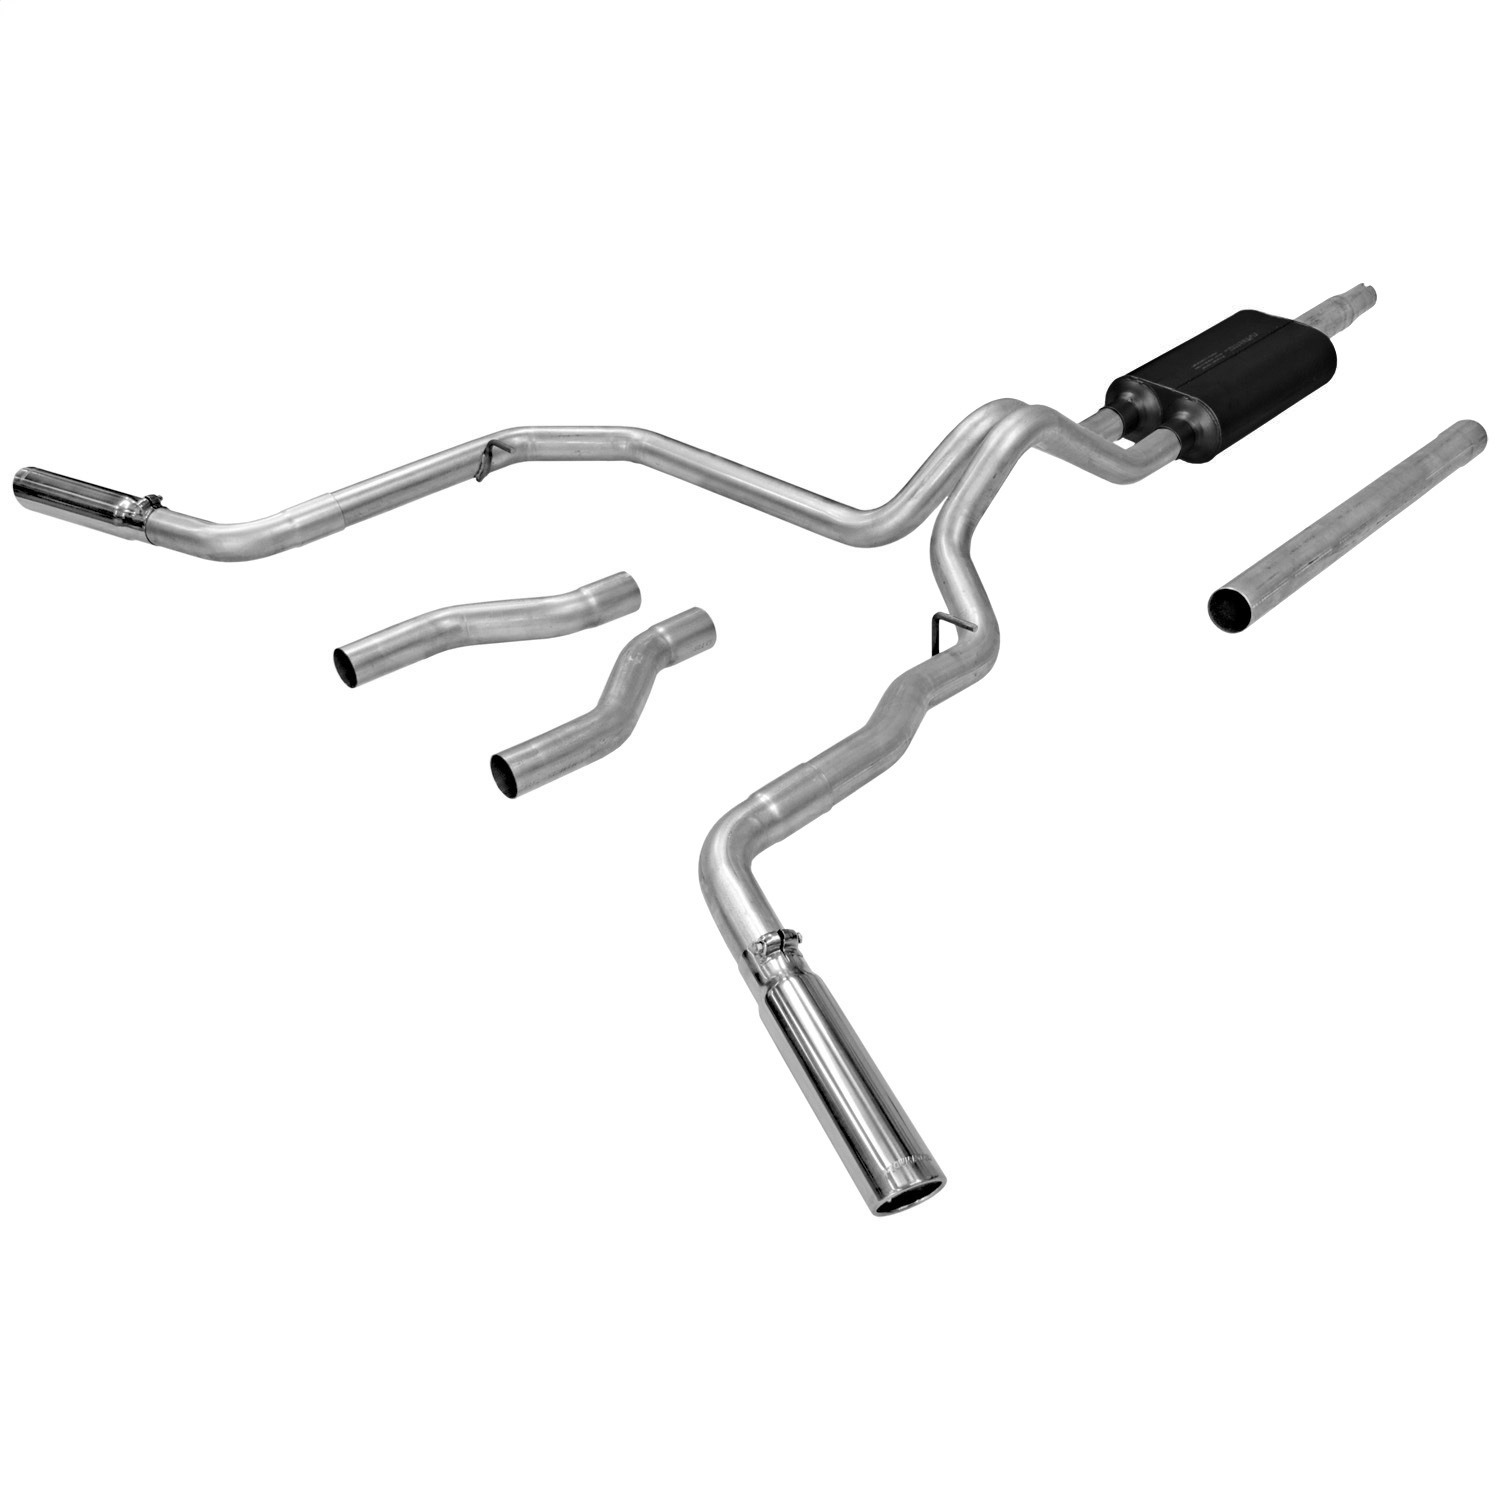 Flowmaster Flowmaster 17471 American Thunder Cat Back Exhaust System Fits 87-96 F-150